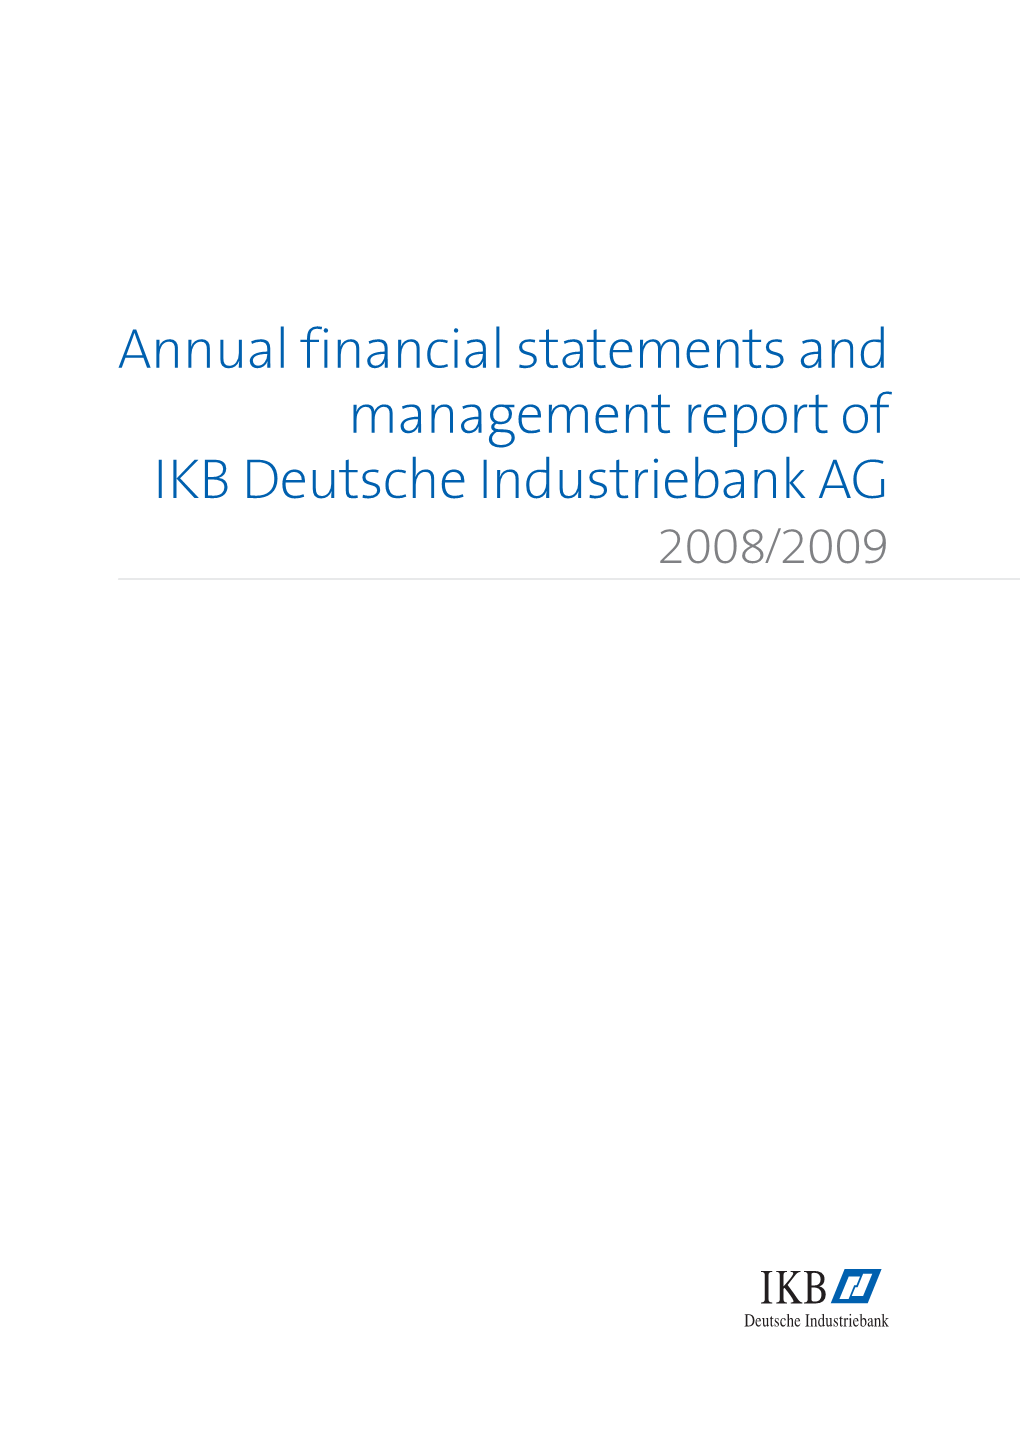 Financial Statements and Management Report AG 2008/09